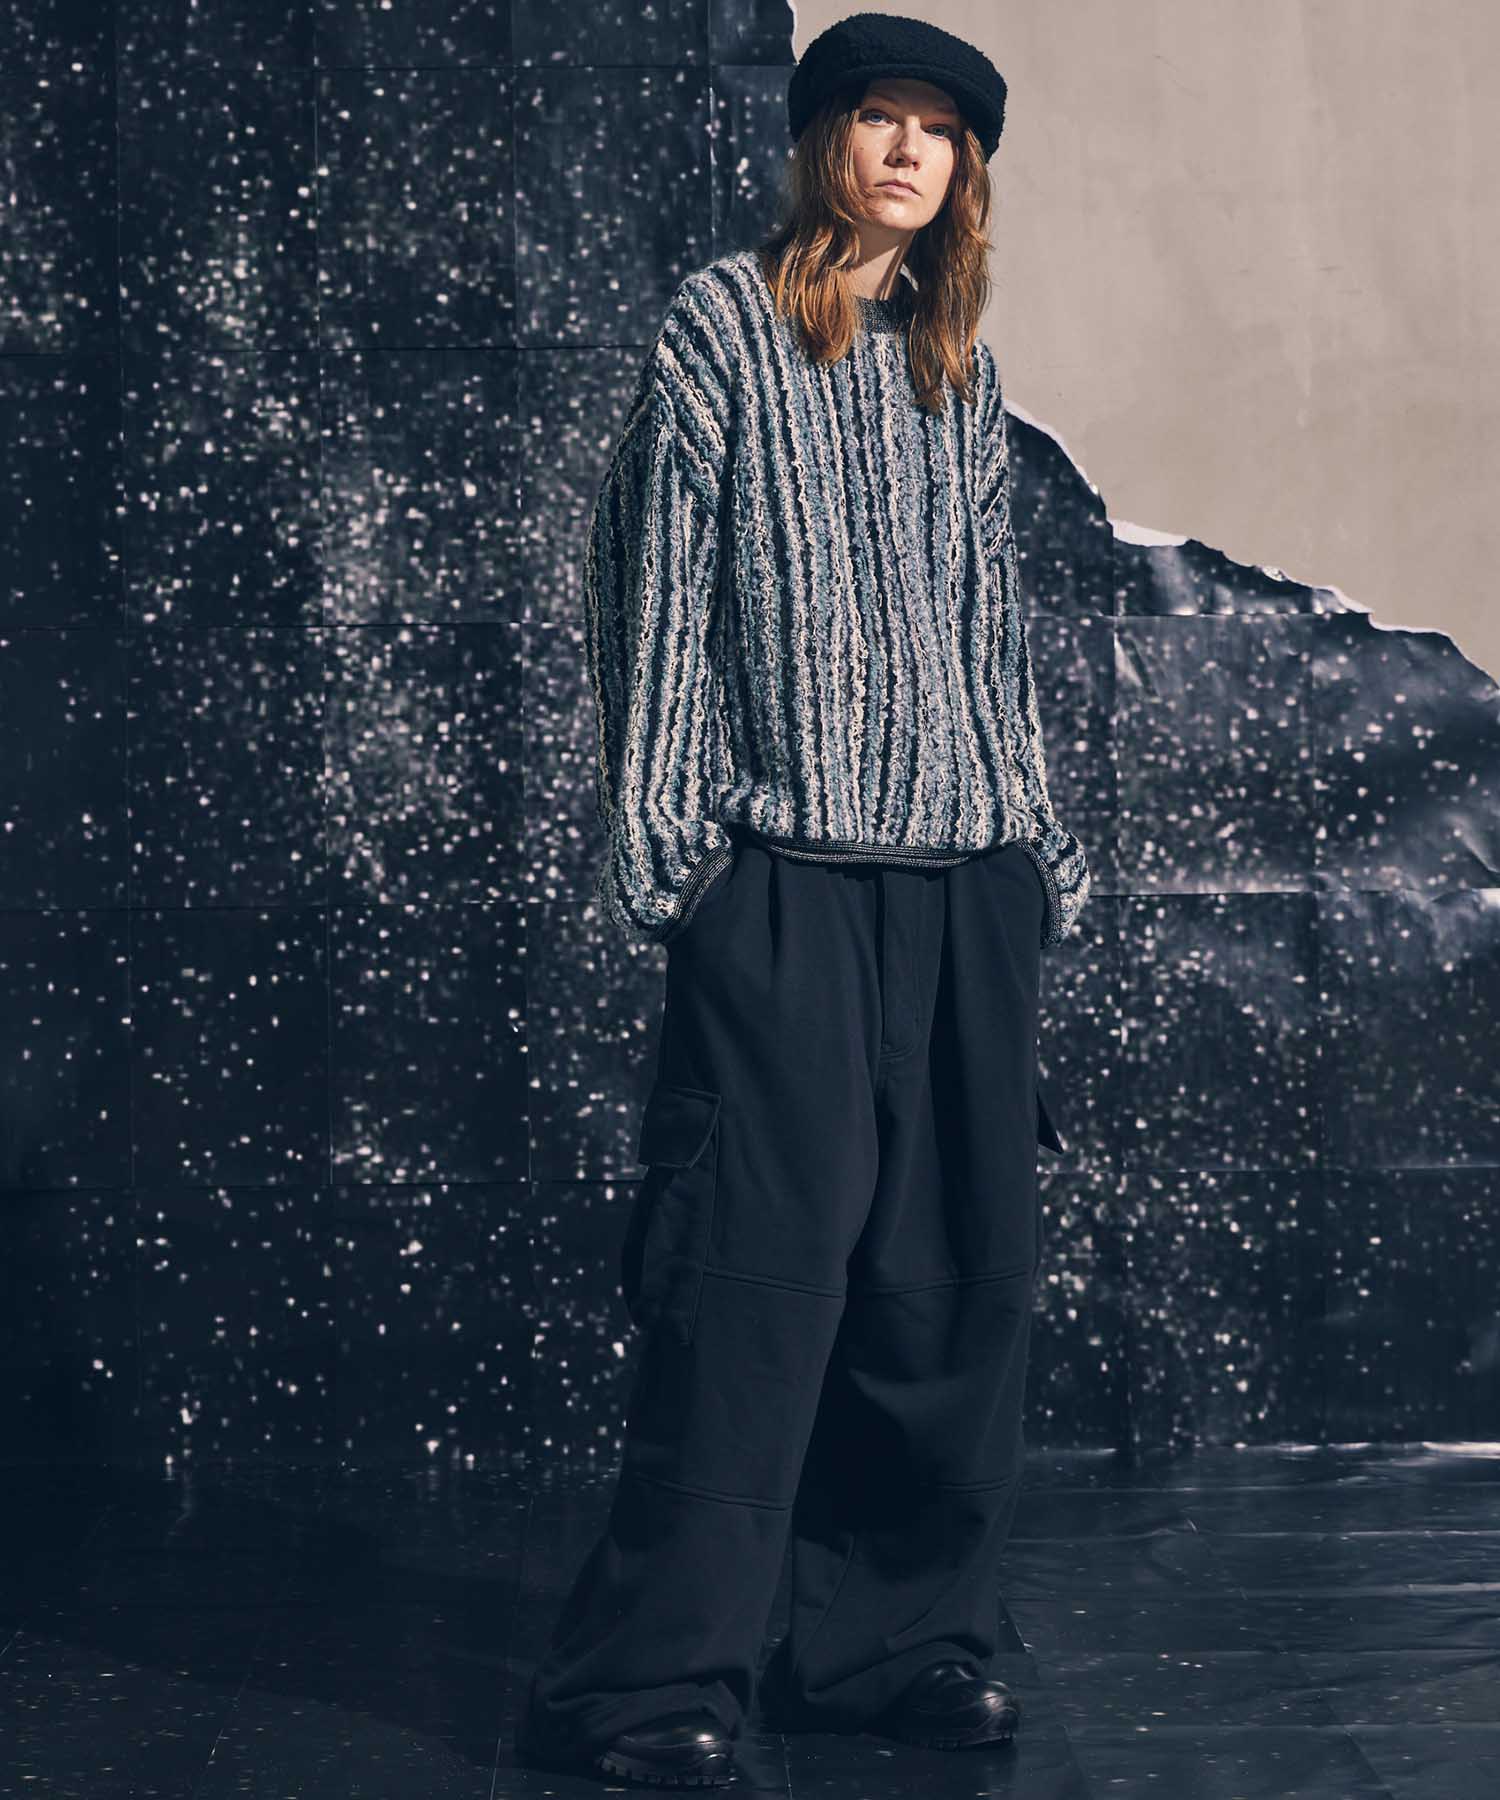 【SALE】Irregular Inlay Knitting Prime-Over Crew Neck Knit Pullover